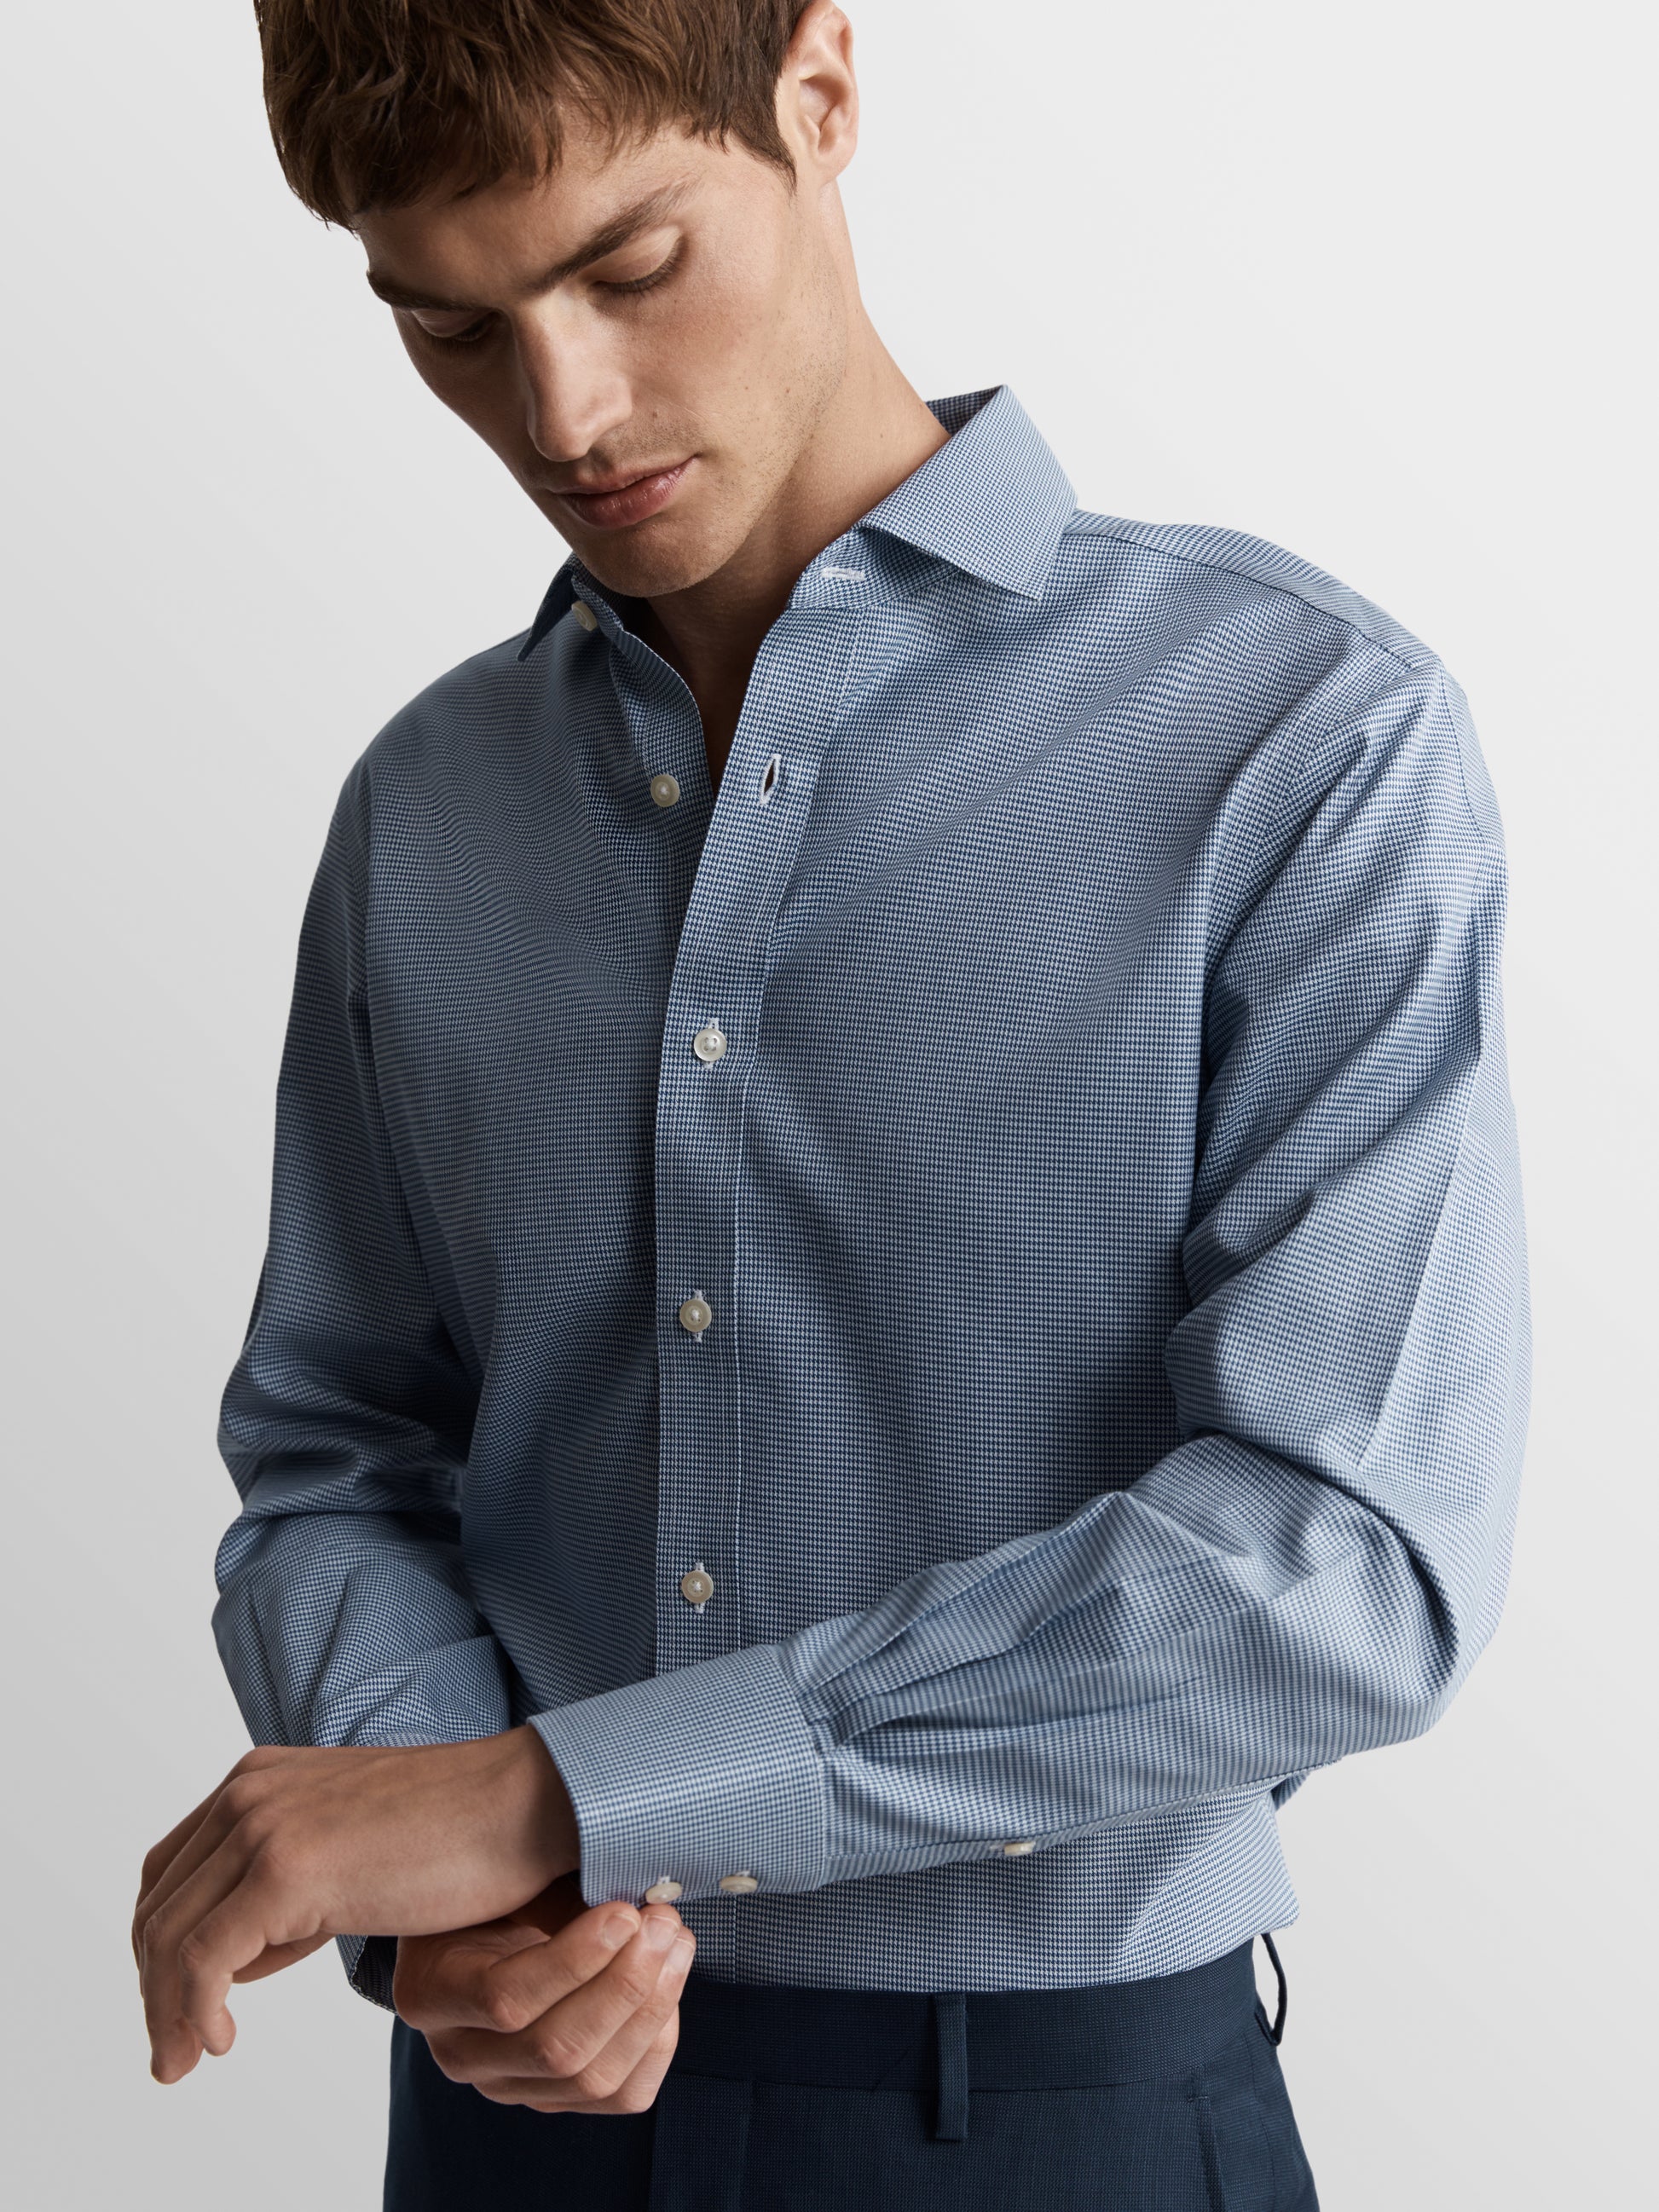 Image 1 of Non-Iron Navy Blue Mini Dogtooth Plain Weave Super Fitted Single Cuff Classic Collar Shirt